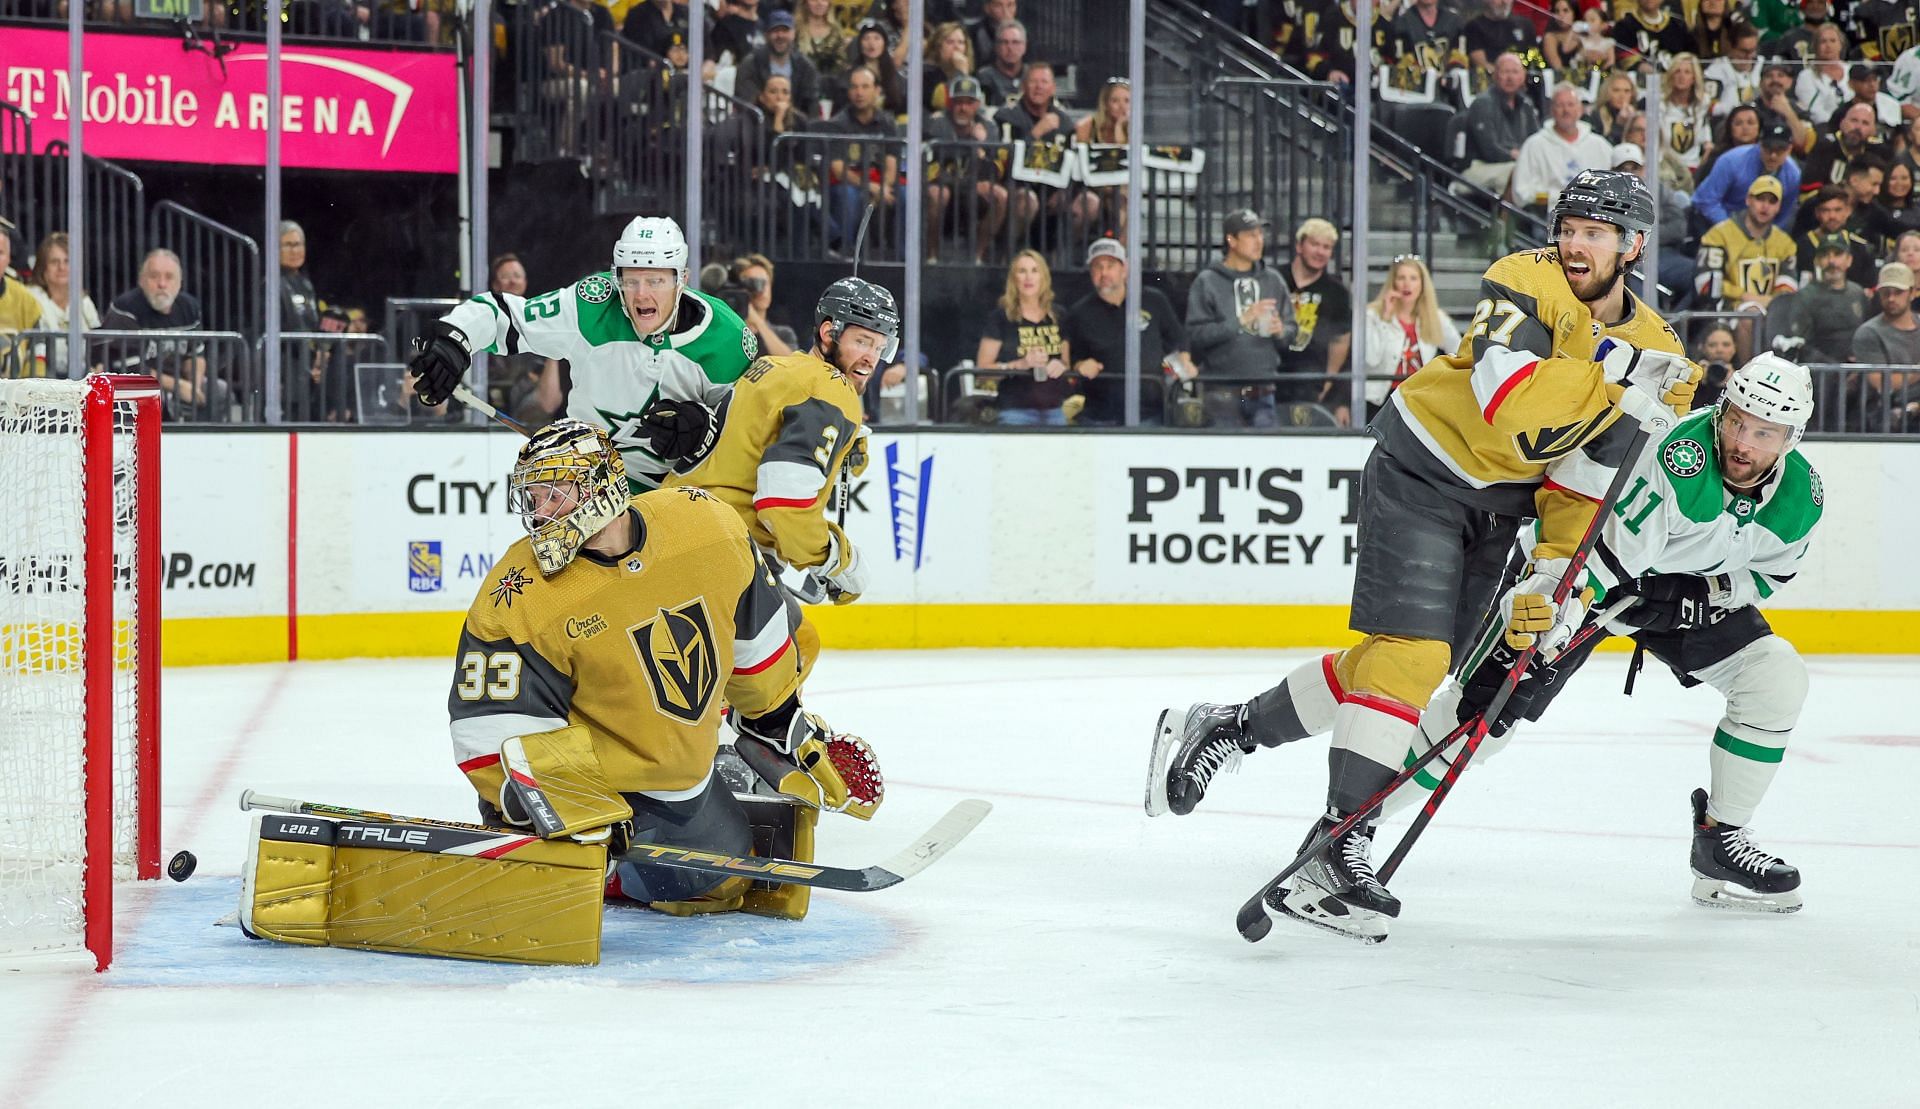 Dallas Stars Dallas Stars vs Vegas Golden Knights Game 6 How to watch, TV channel list, live stream details and more